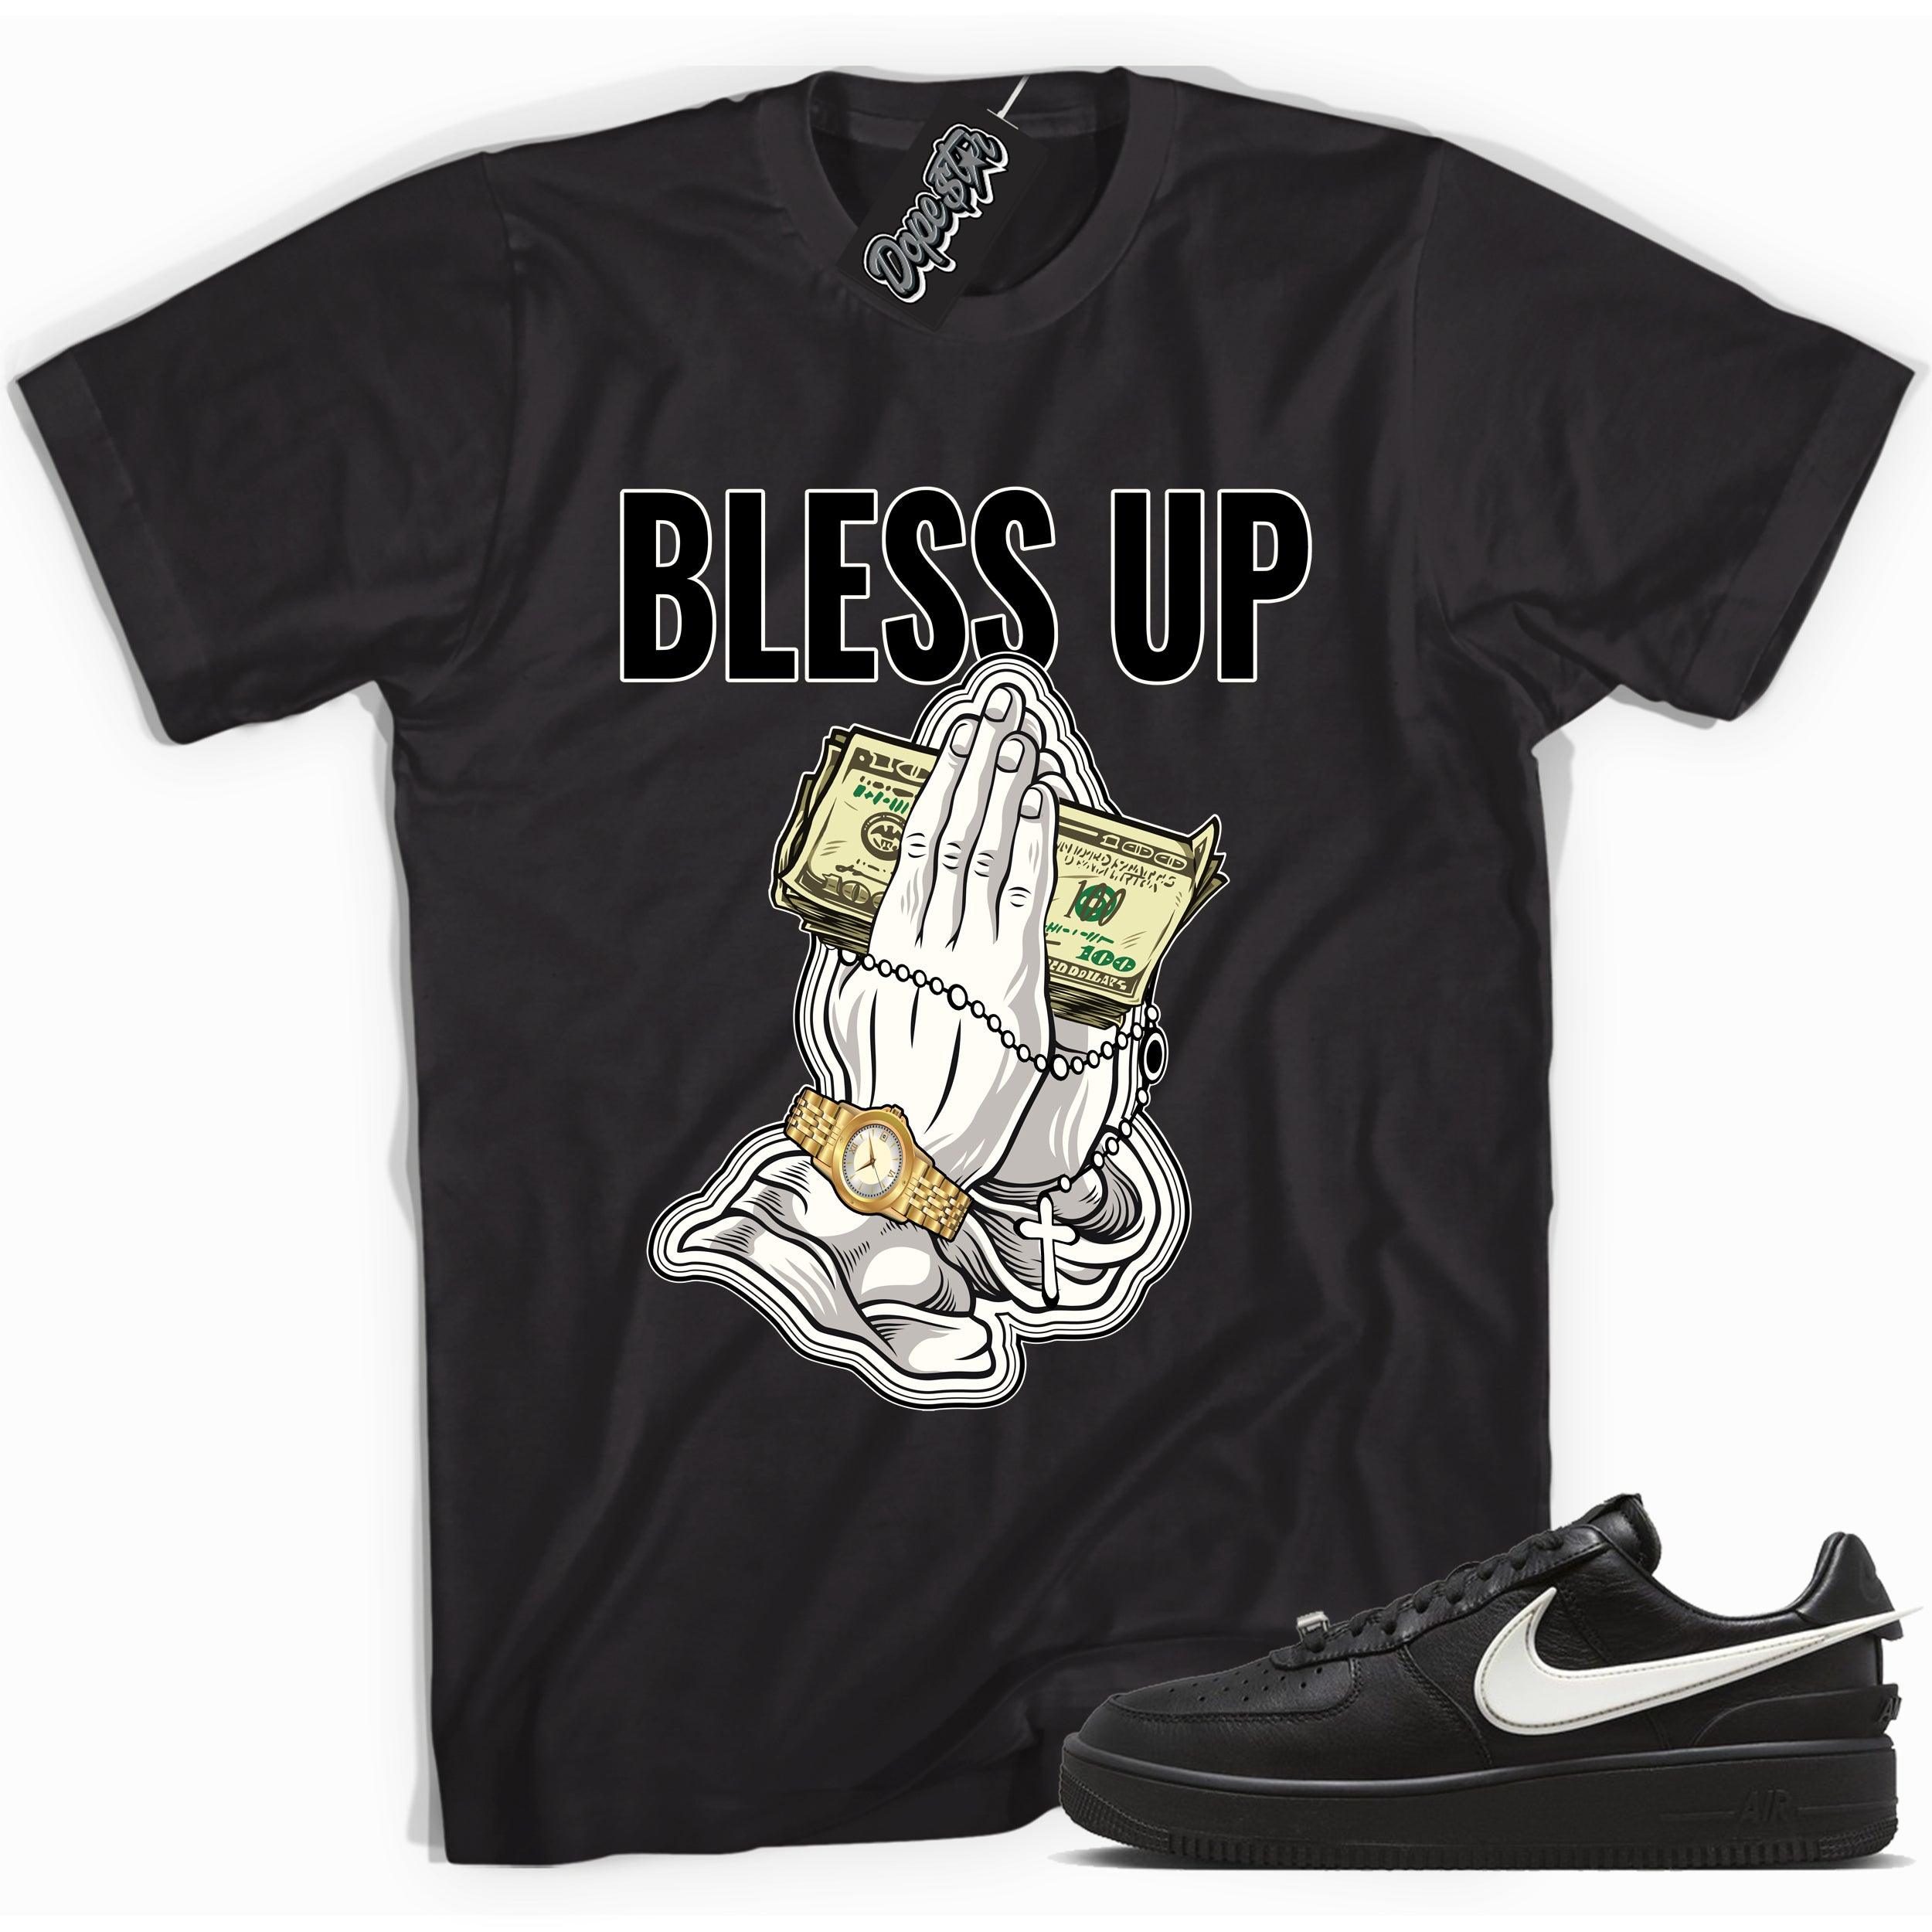 Cool black graphic tee with 'bless up' print, that perfectly matches Nike Air Force 1 Low SP Ambush Phantom sneakers.